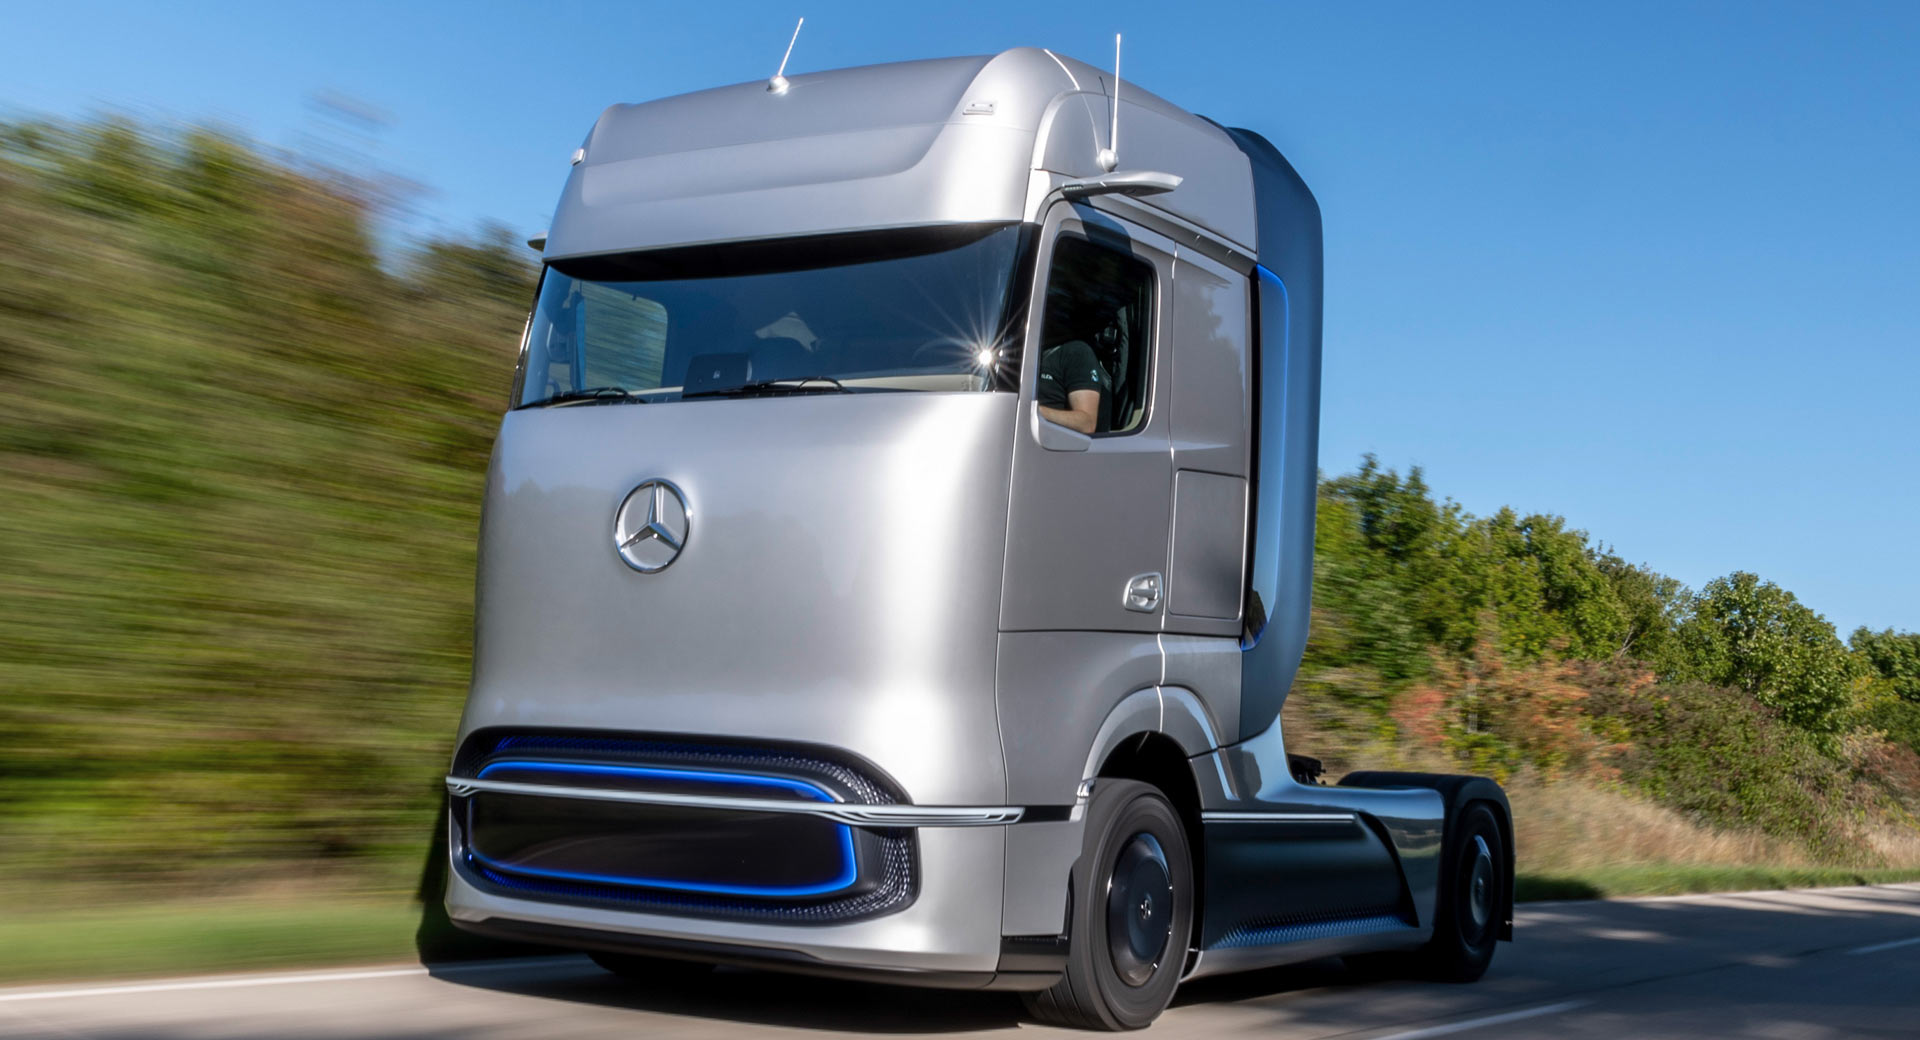 The new Mercedes-Benz GenH2 half-fuel cell prototype is coming soon